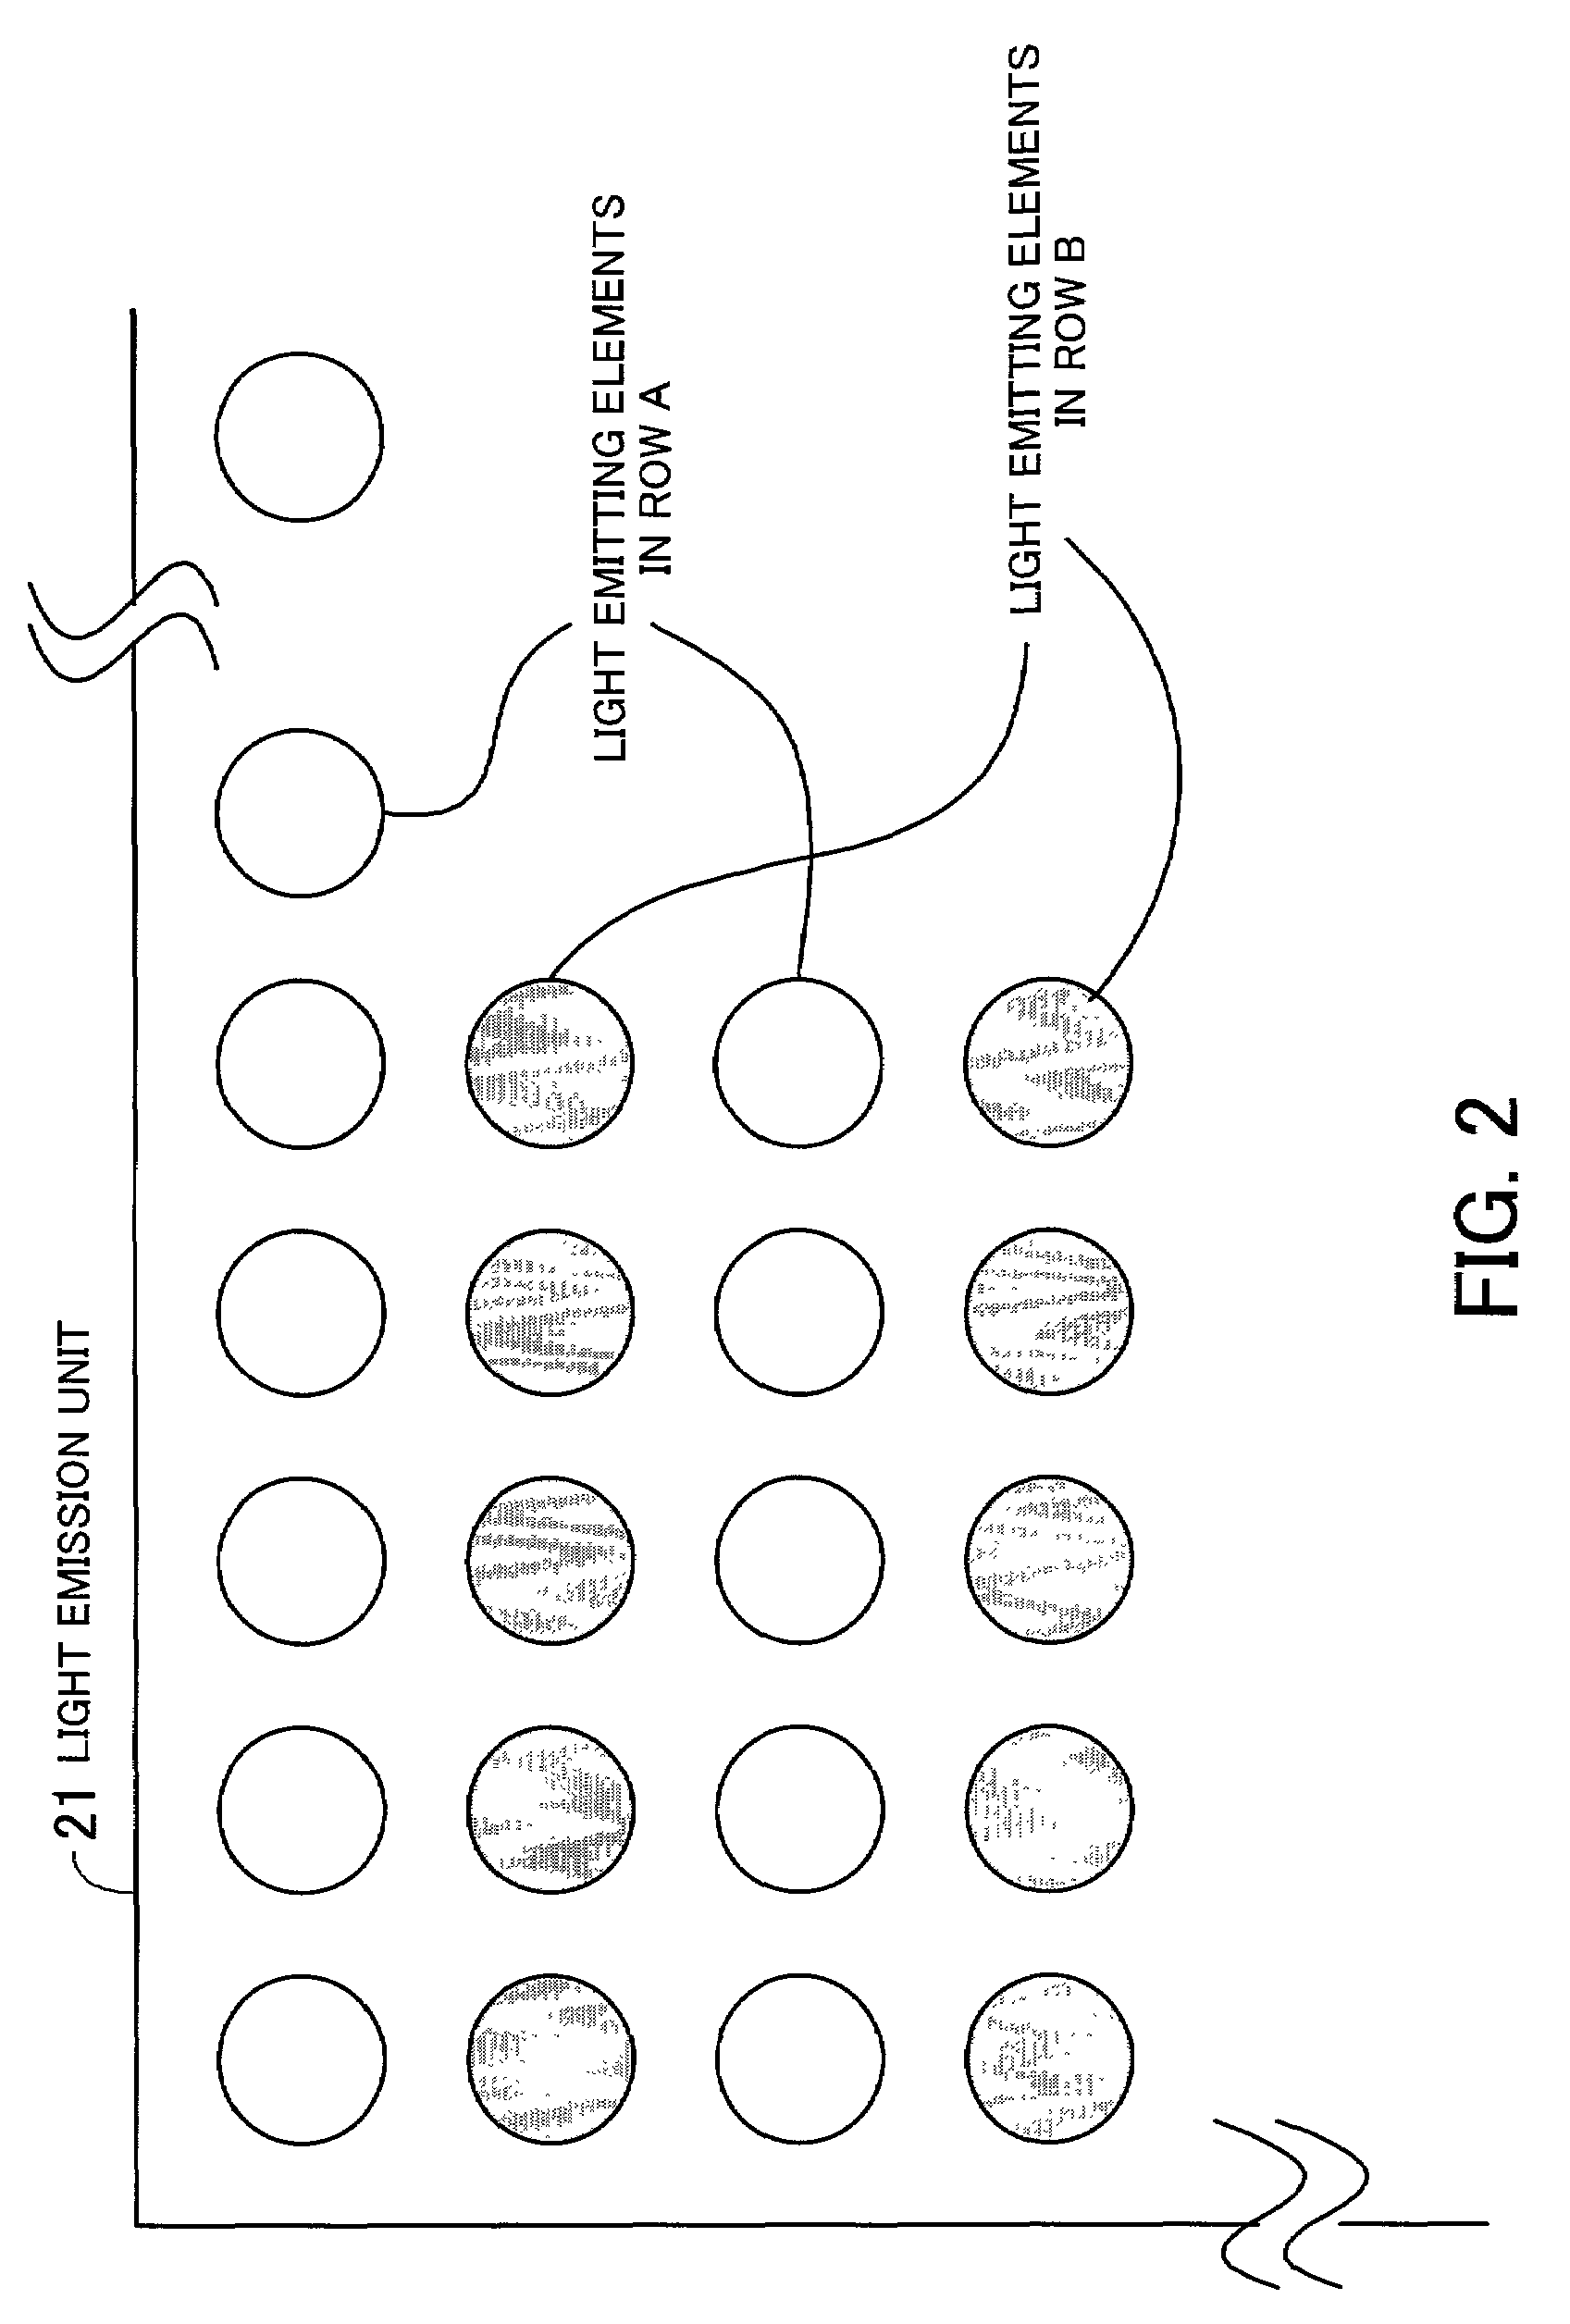 Image monitor apparatus controlling camera and illumination in order to optimize luminance of picked-up image